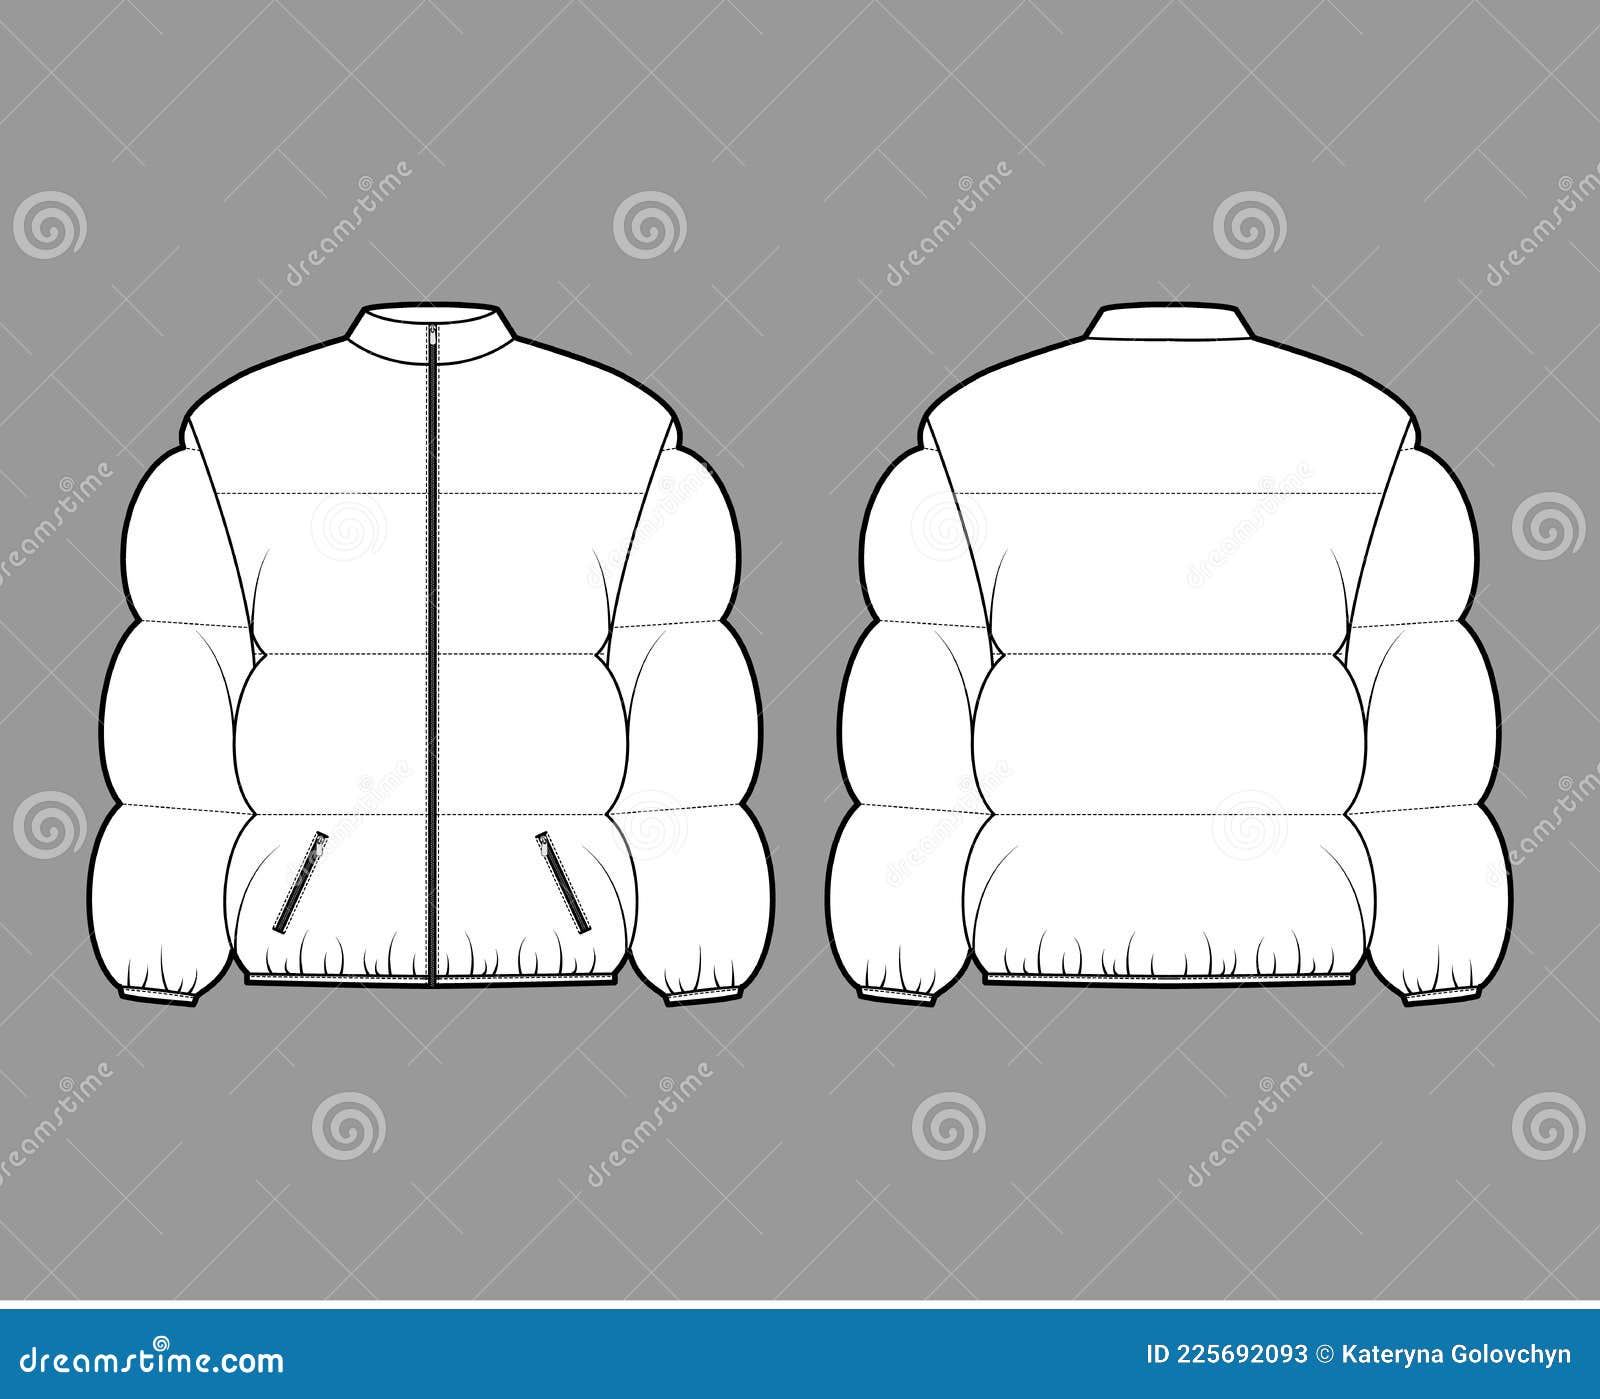 Puffer Coat Flat Illustrator Sketch -   Flat drawings, Technical  drawing, Drawing clothes